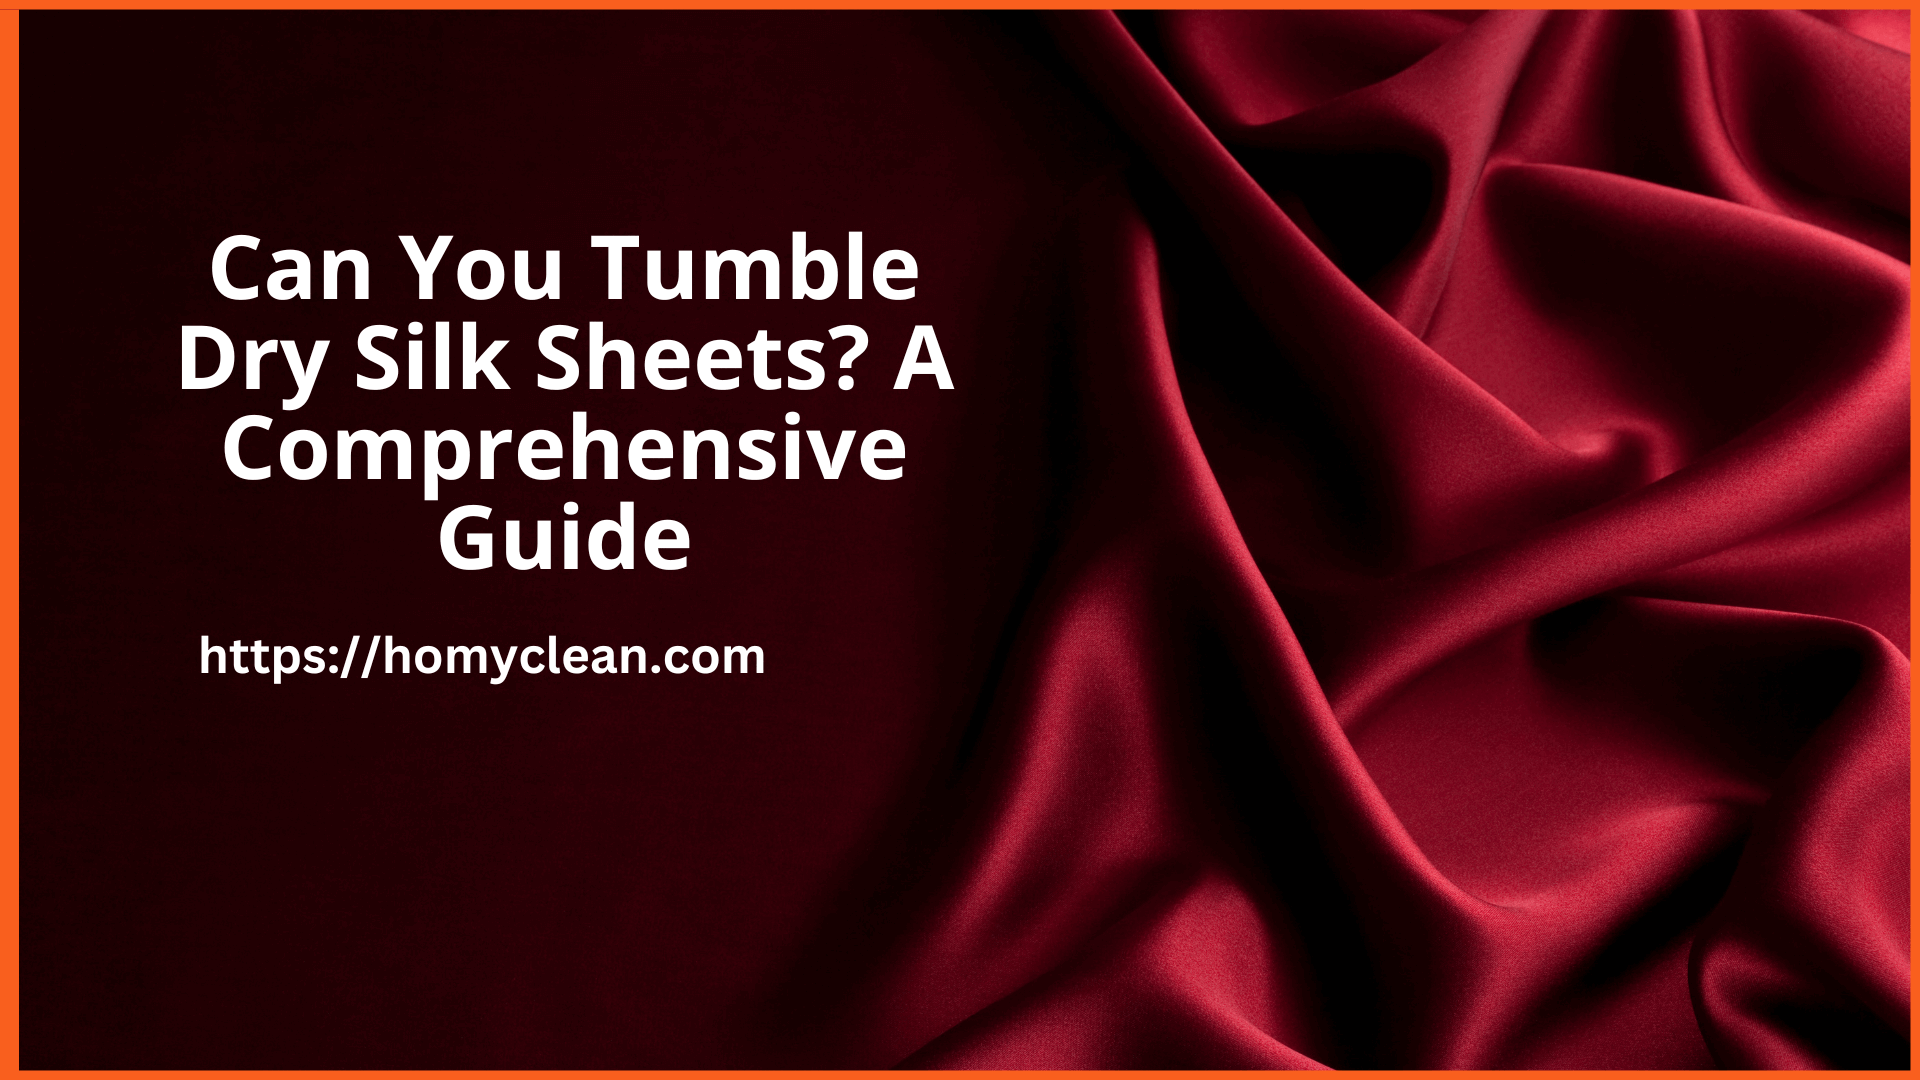 Can You Tumble Dry Silk Sheets